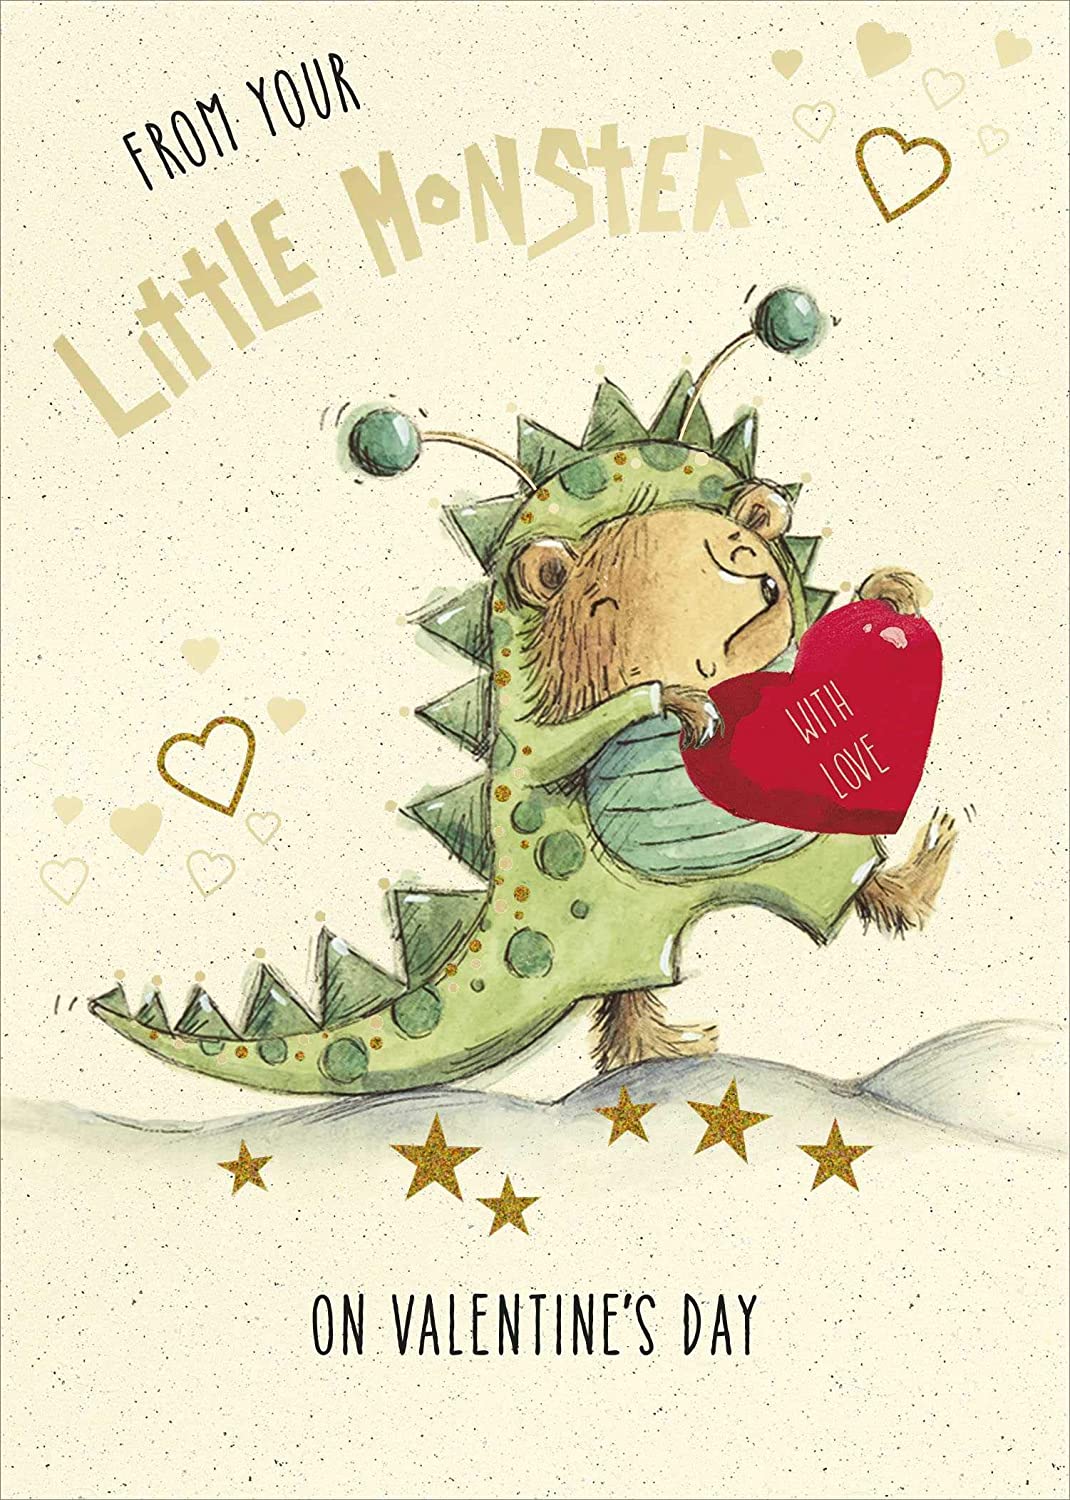 Perfect Valentine's Day Card for Mum or Dad From Your Little Monster